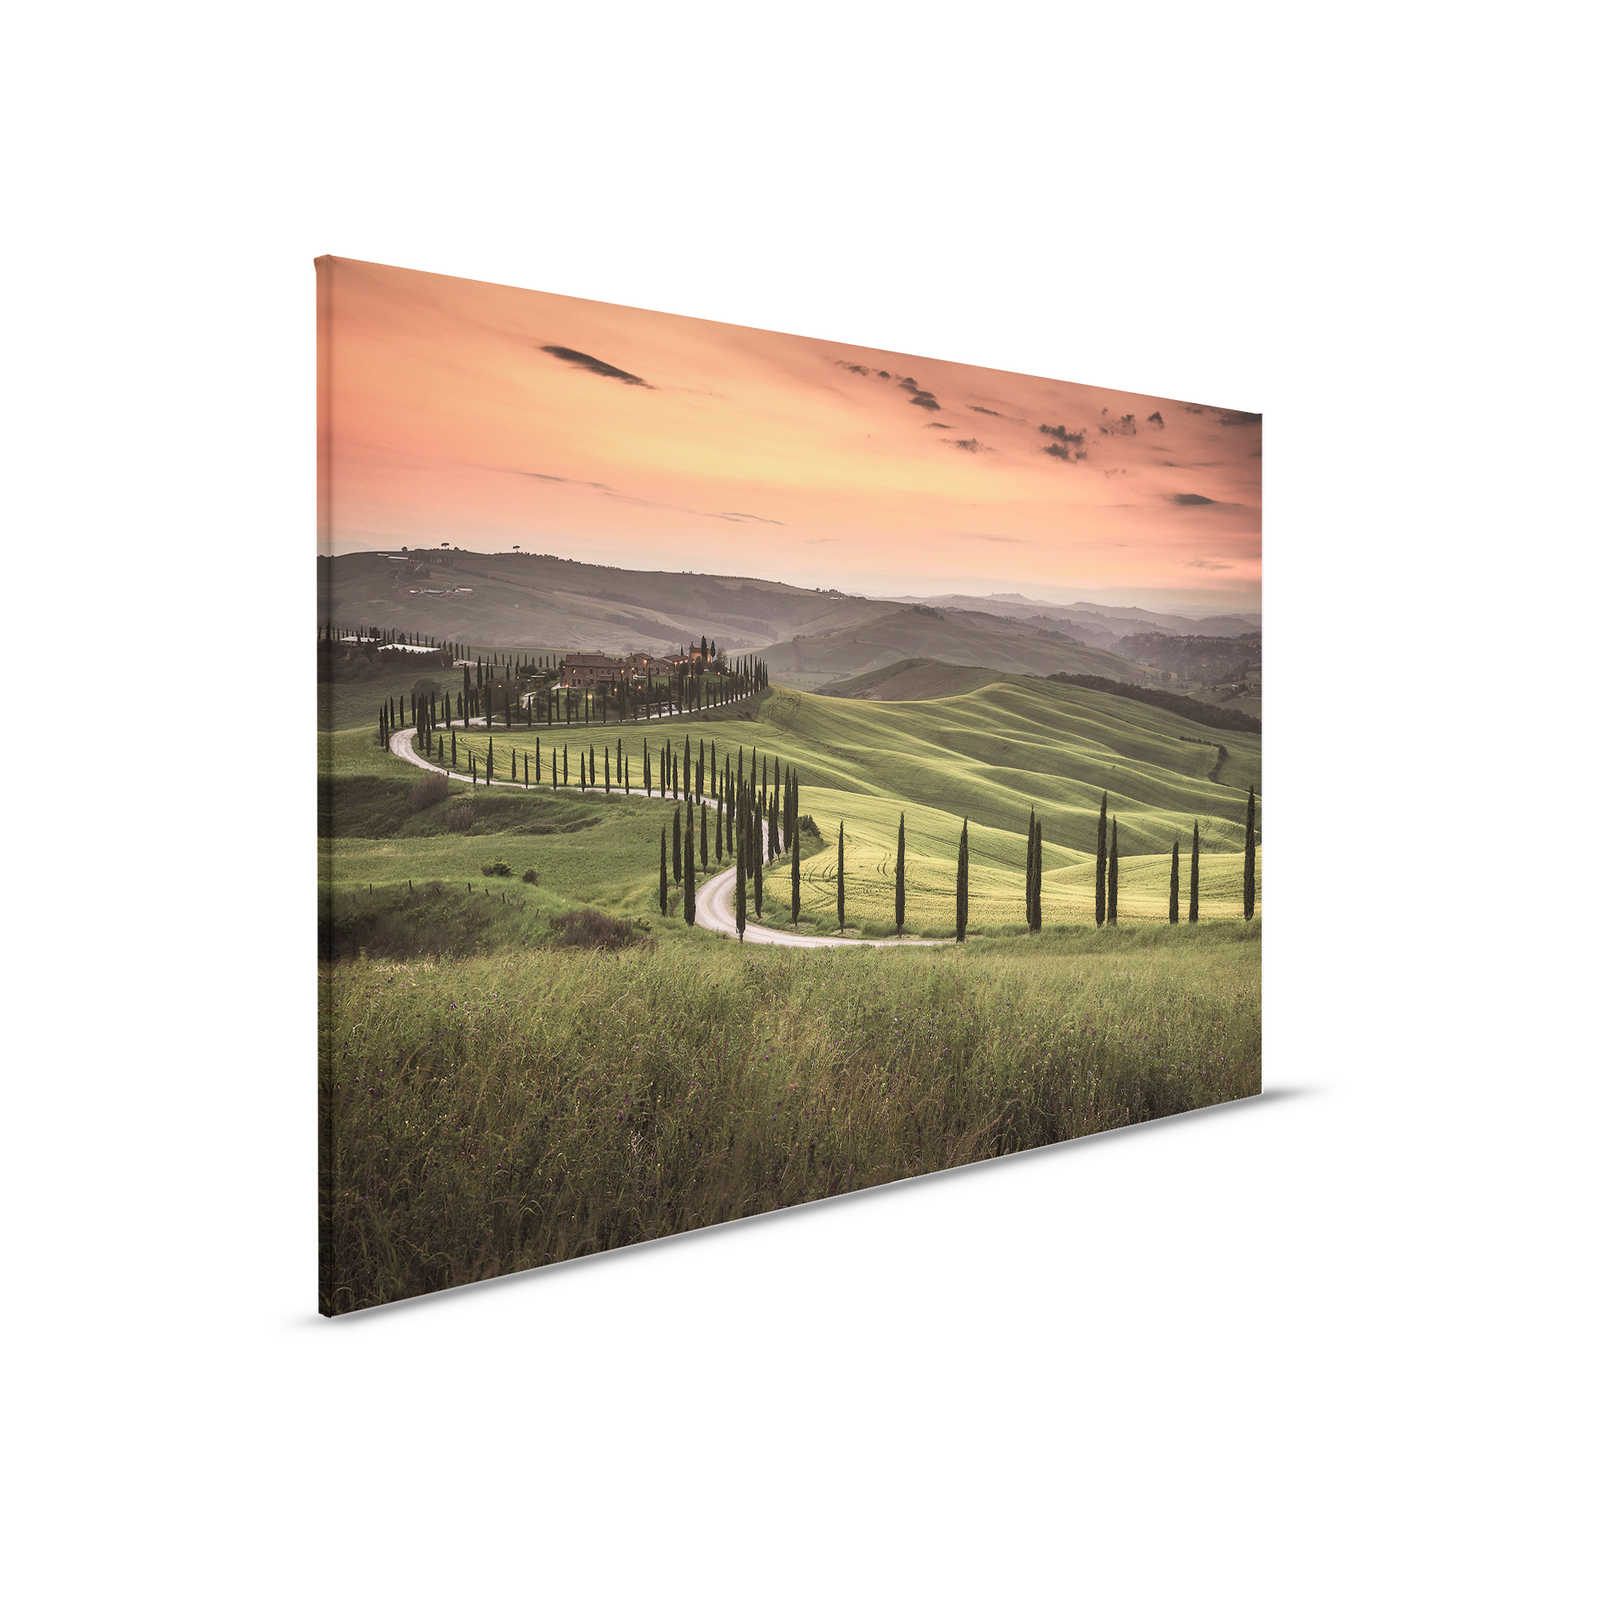         Canvas with Tuscan landscape at dusk - 0.90 m x 0.60 m
    